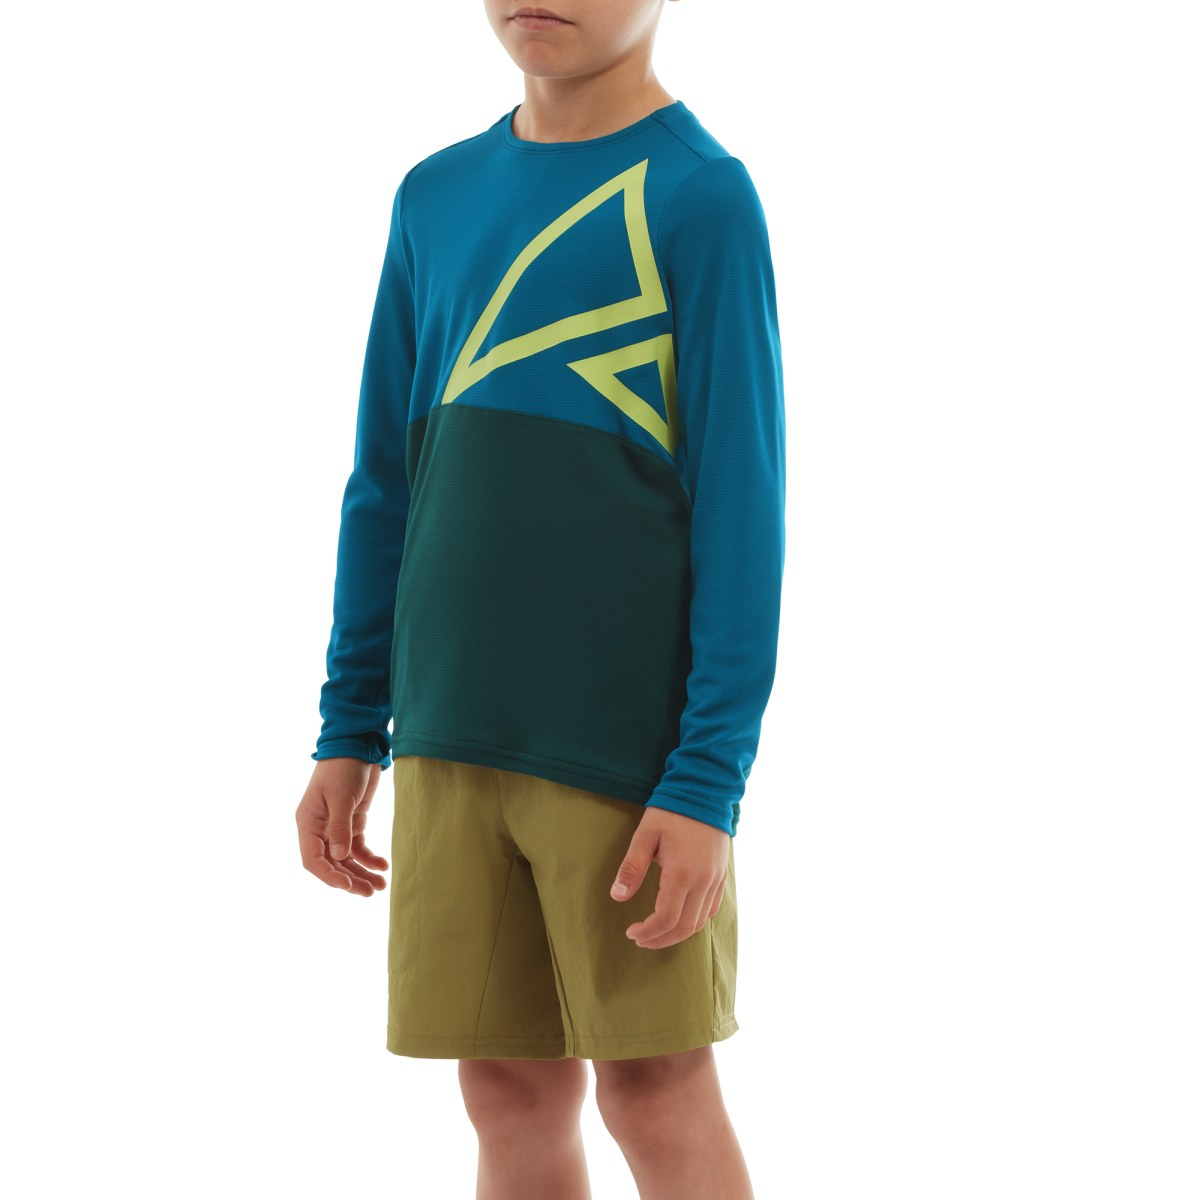 Altura  Spark Lightweight Kids Long Sleeve Jersey 11 to 12 Years BLUE/TEAL